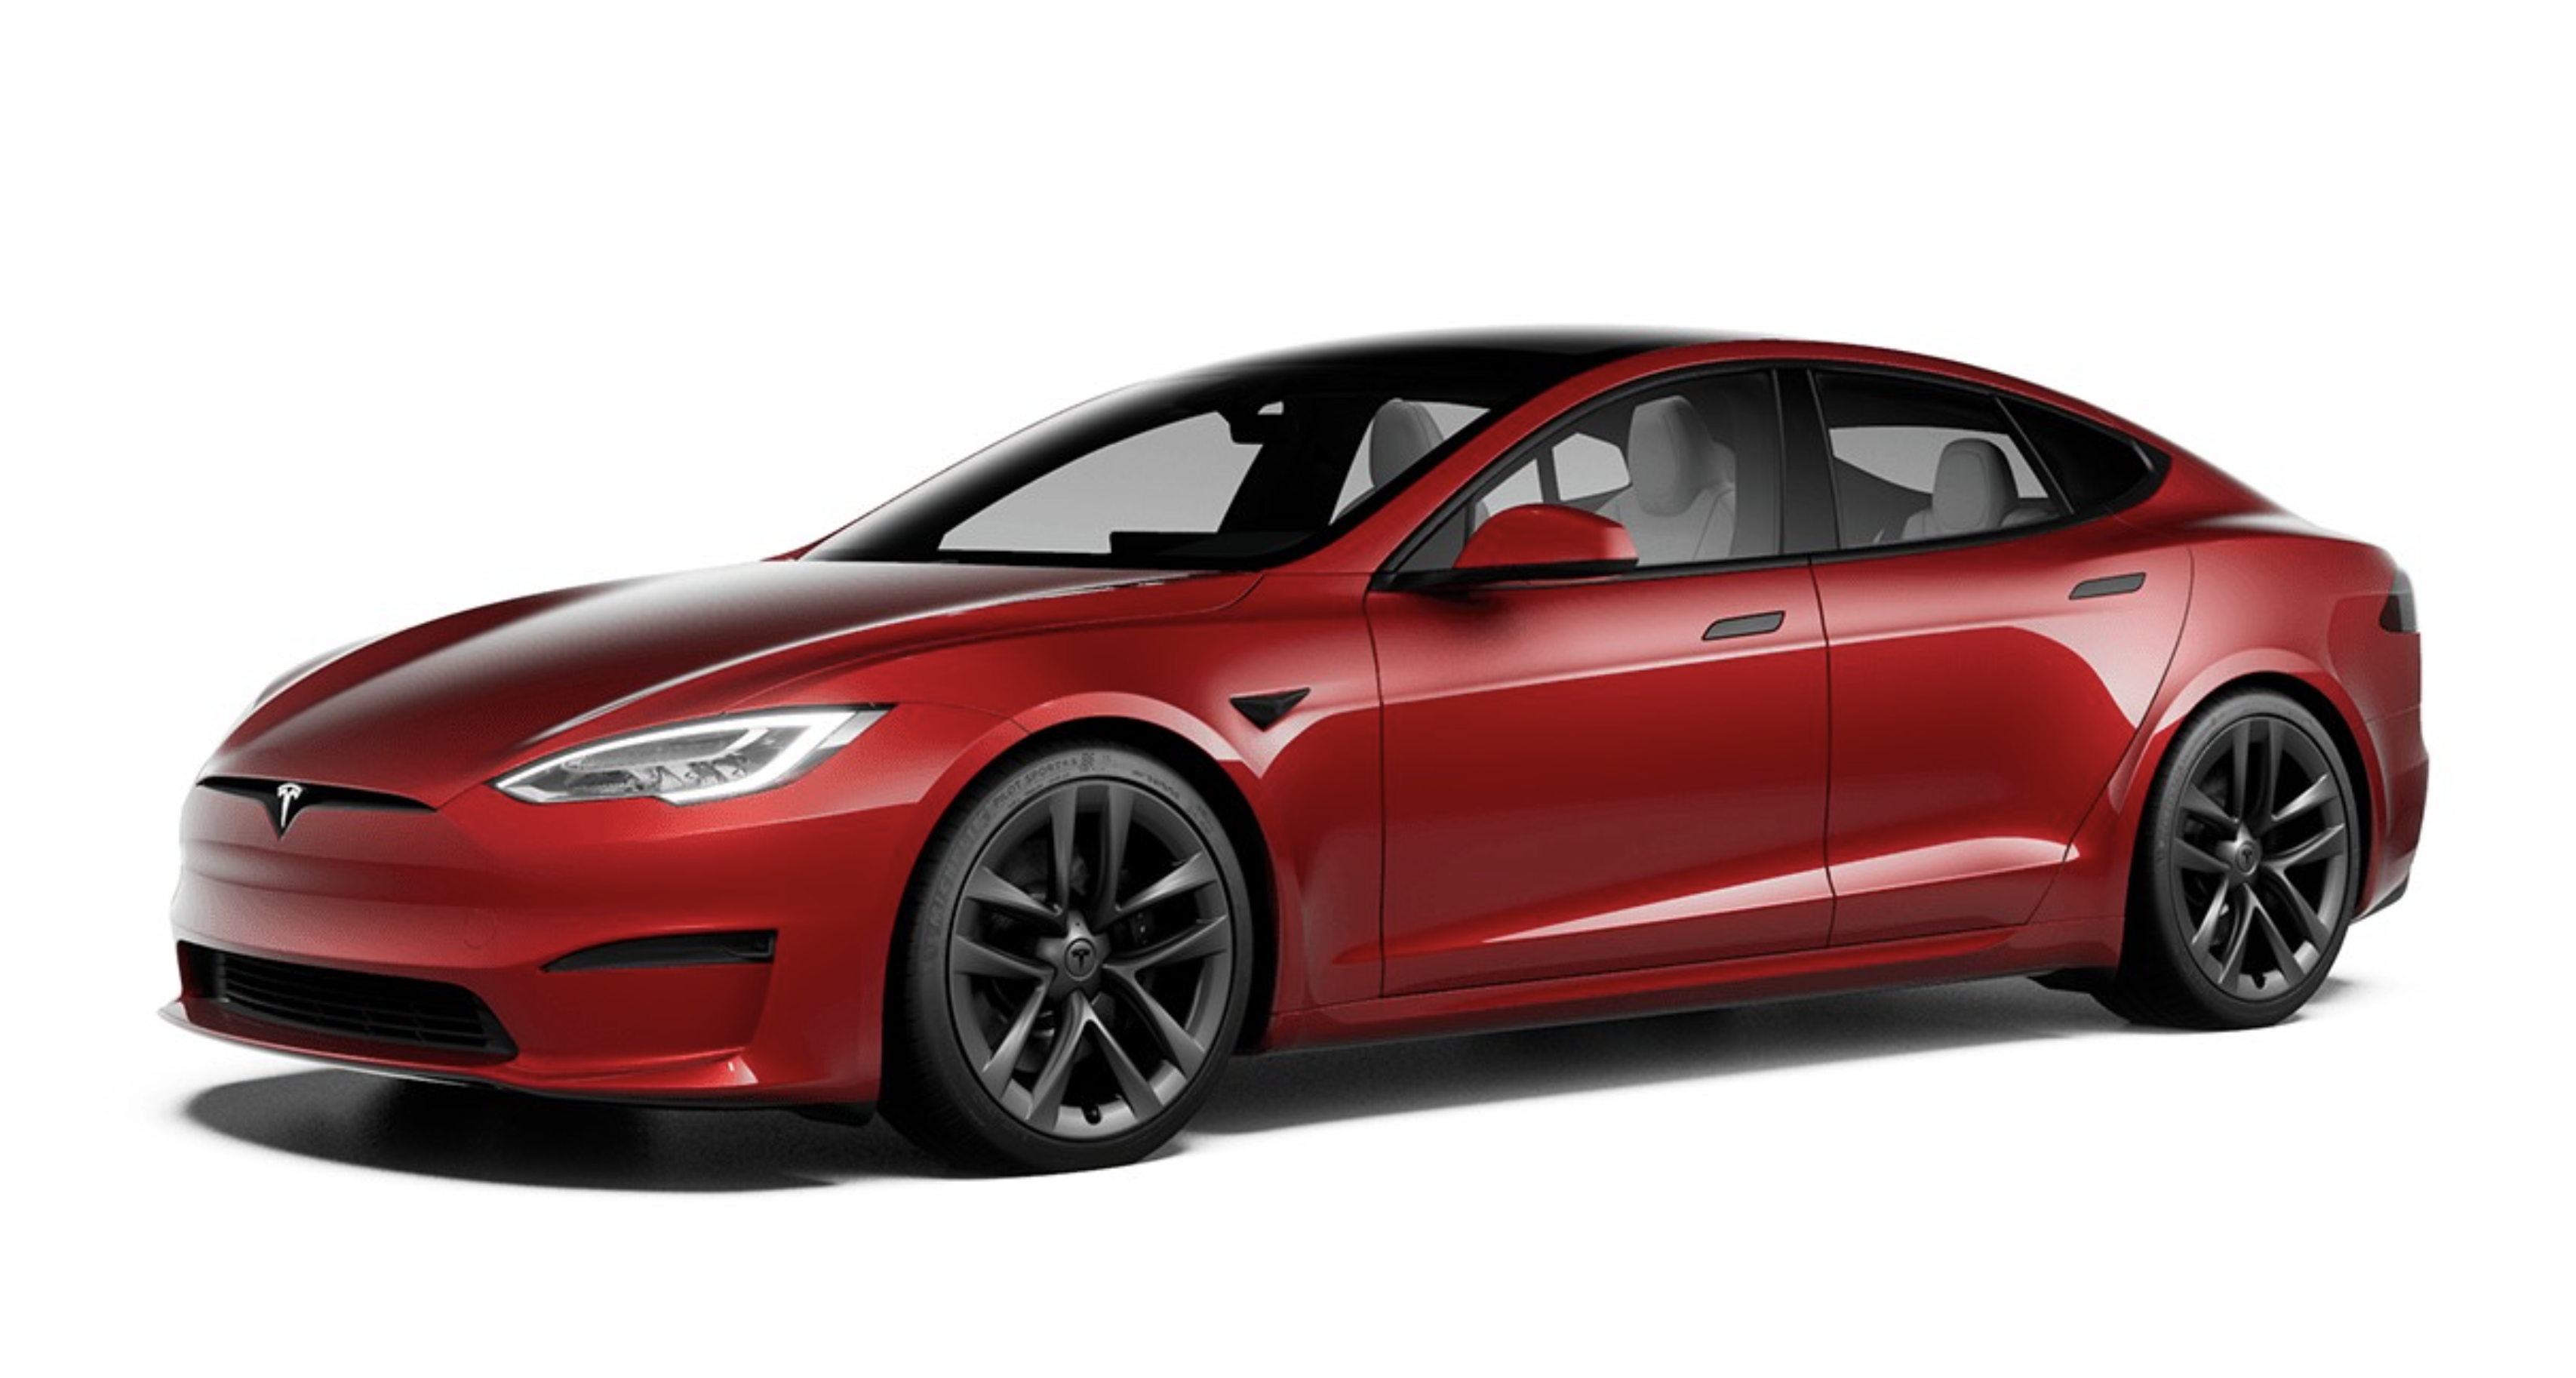 Tesla quickest Car is here, meet the new Model S